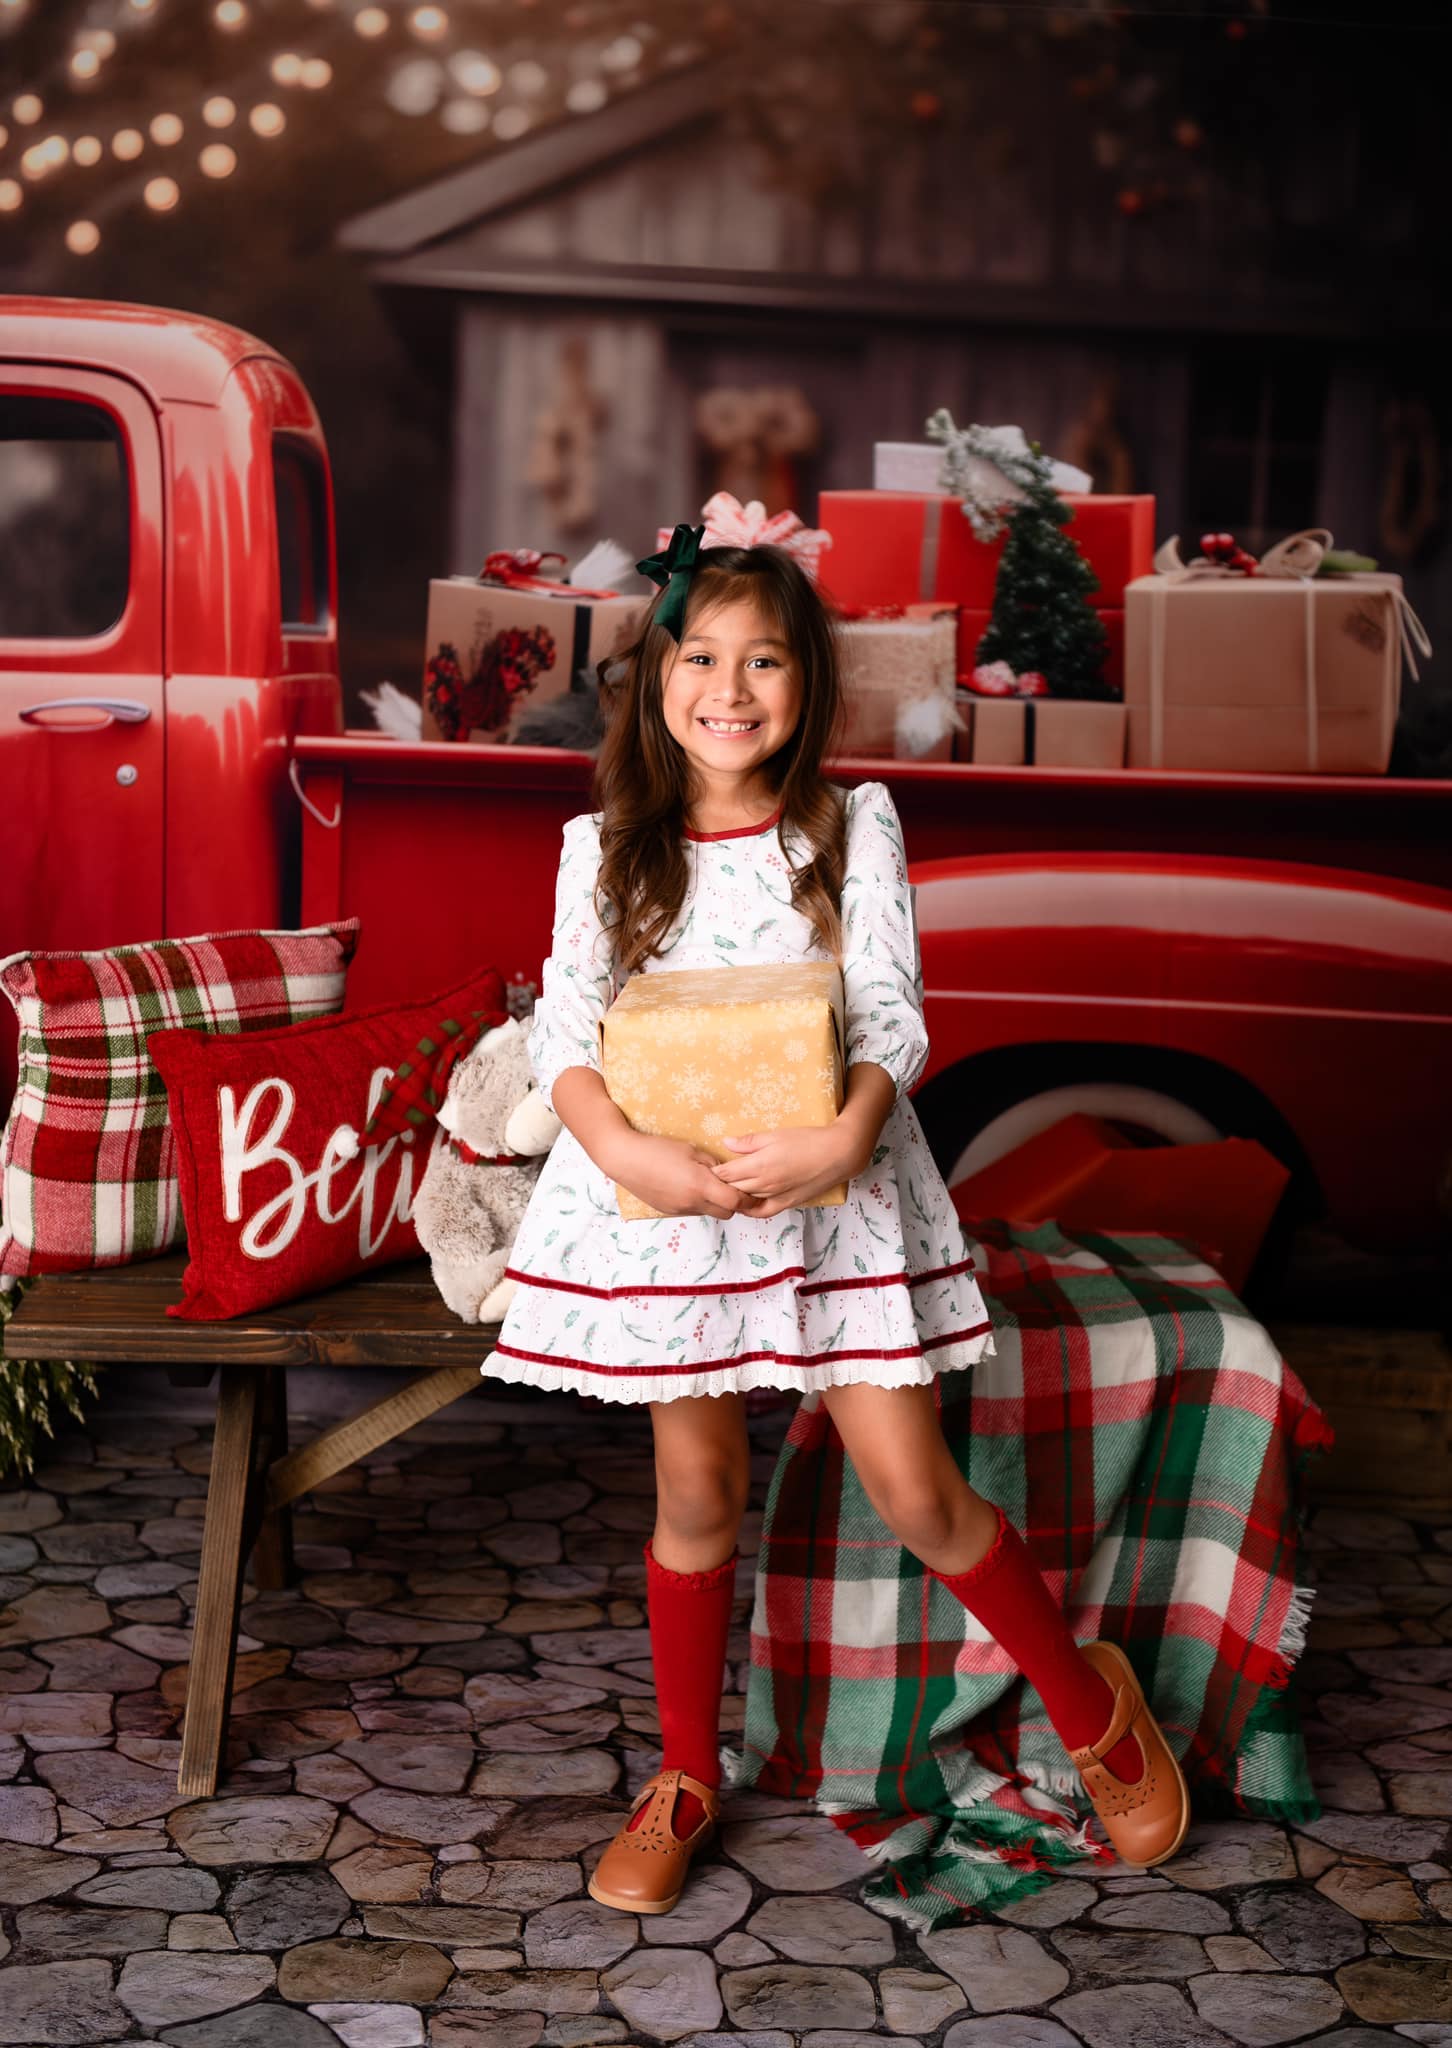 Kate Christmas Gift in Red Car Backdrop for Photography